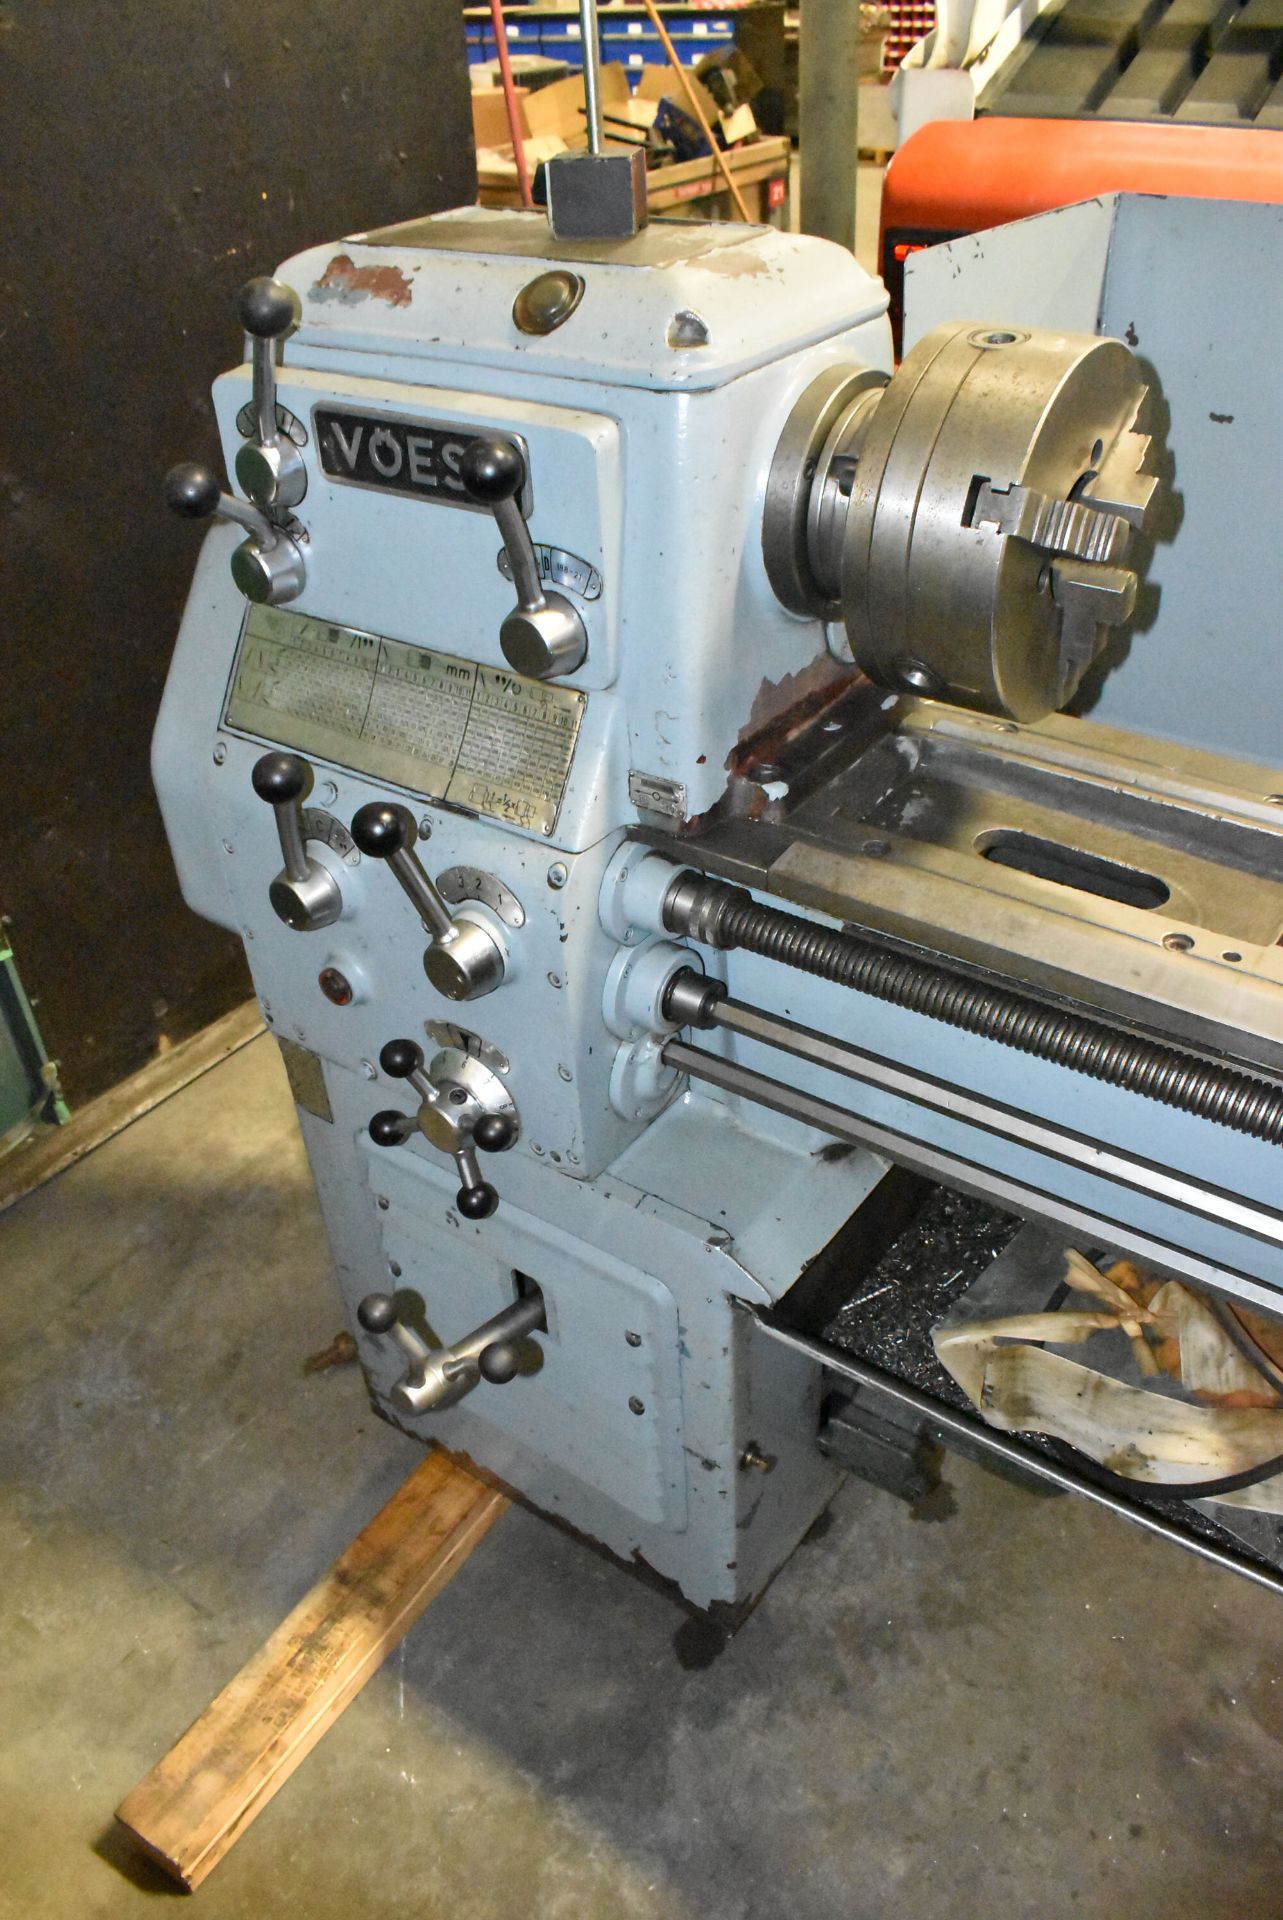 VOEST GAP BED ENGINE LATHE WITH 19" SWING OVER BED, 60" BETWEEN CENTERS,1.75" BORE, SPEEDS TO - Image 4 of 8